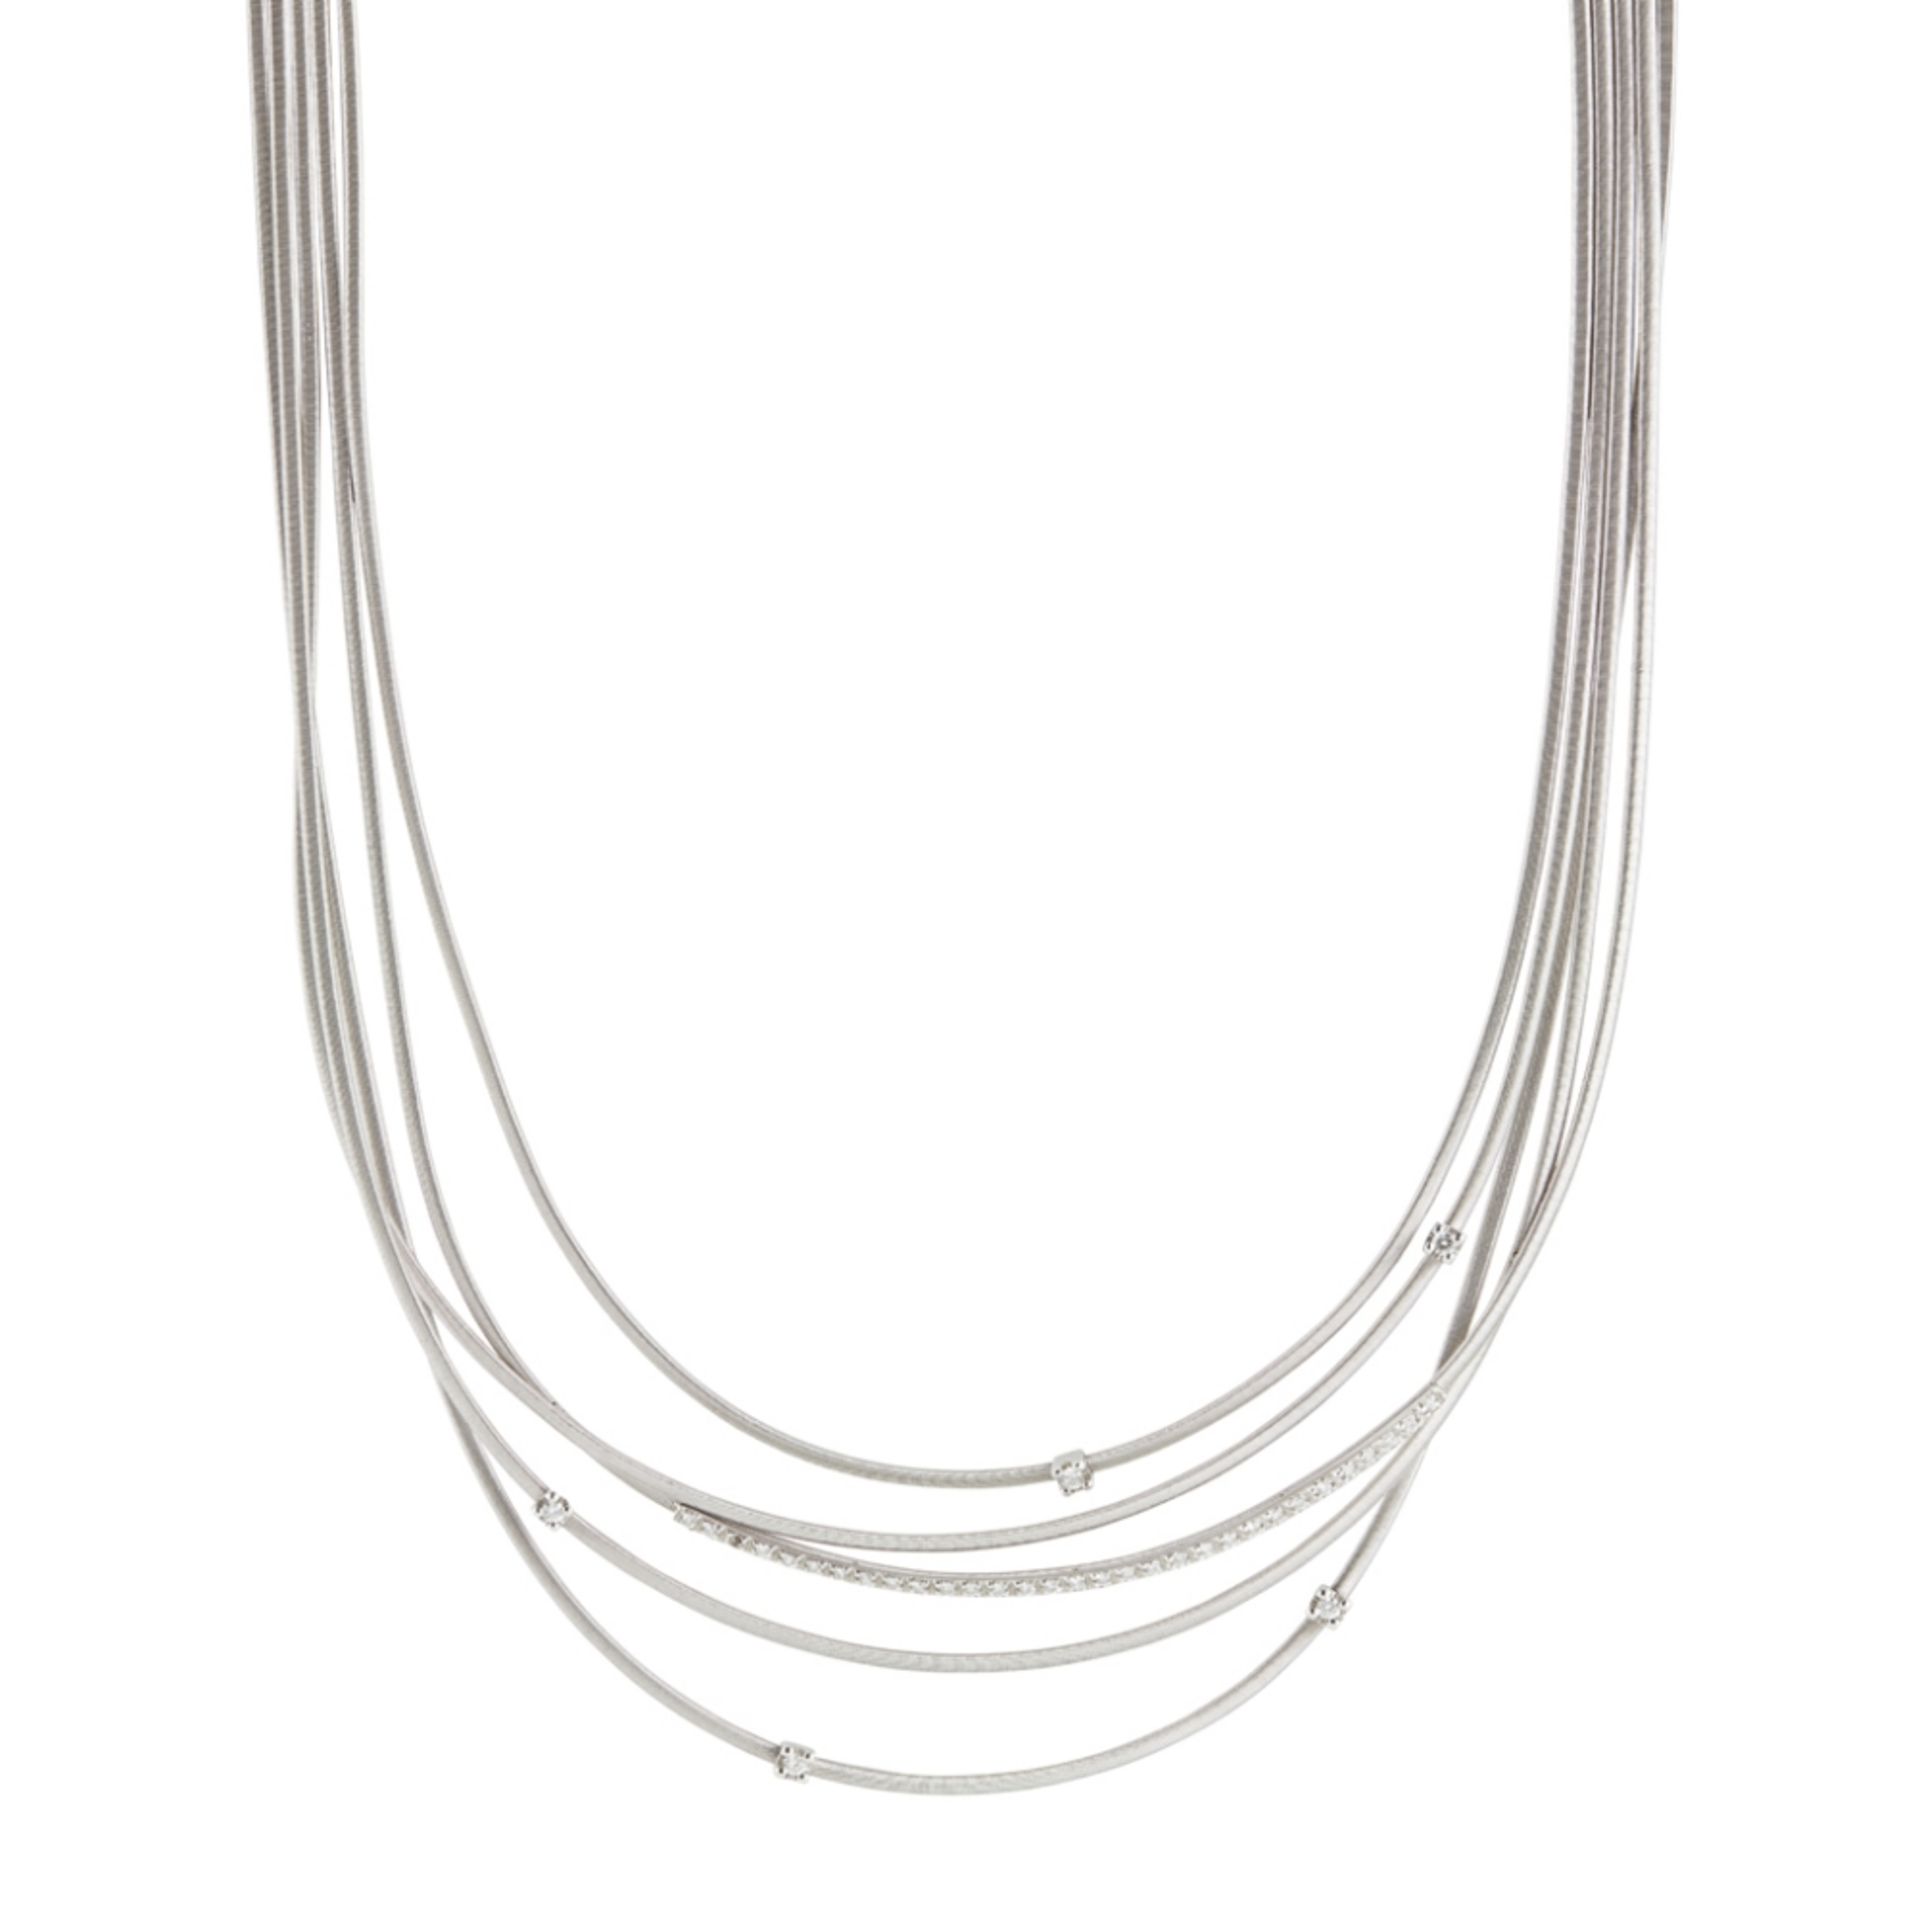 A diamond set 'Goa' necklace, Marco Bicego composed of five coiled strands, set with a central row